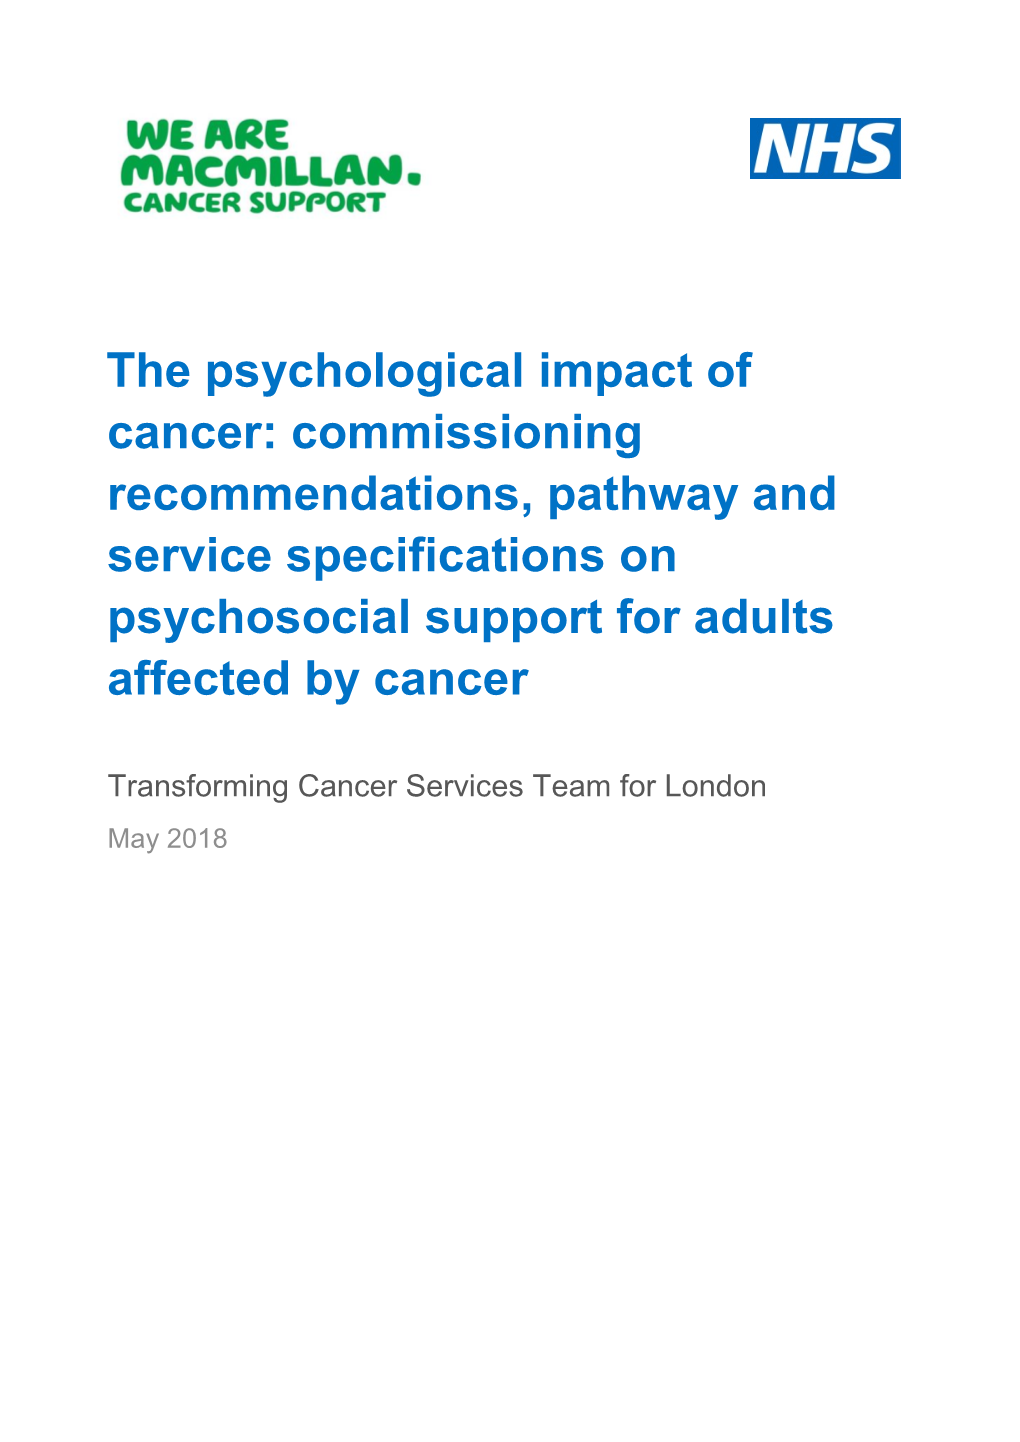 The Psychological Impact of Cancer: Commissioning Recommendations, Pathway and Service Specifications on Psychosocial Support for Adults Affected by Cancer